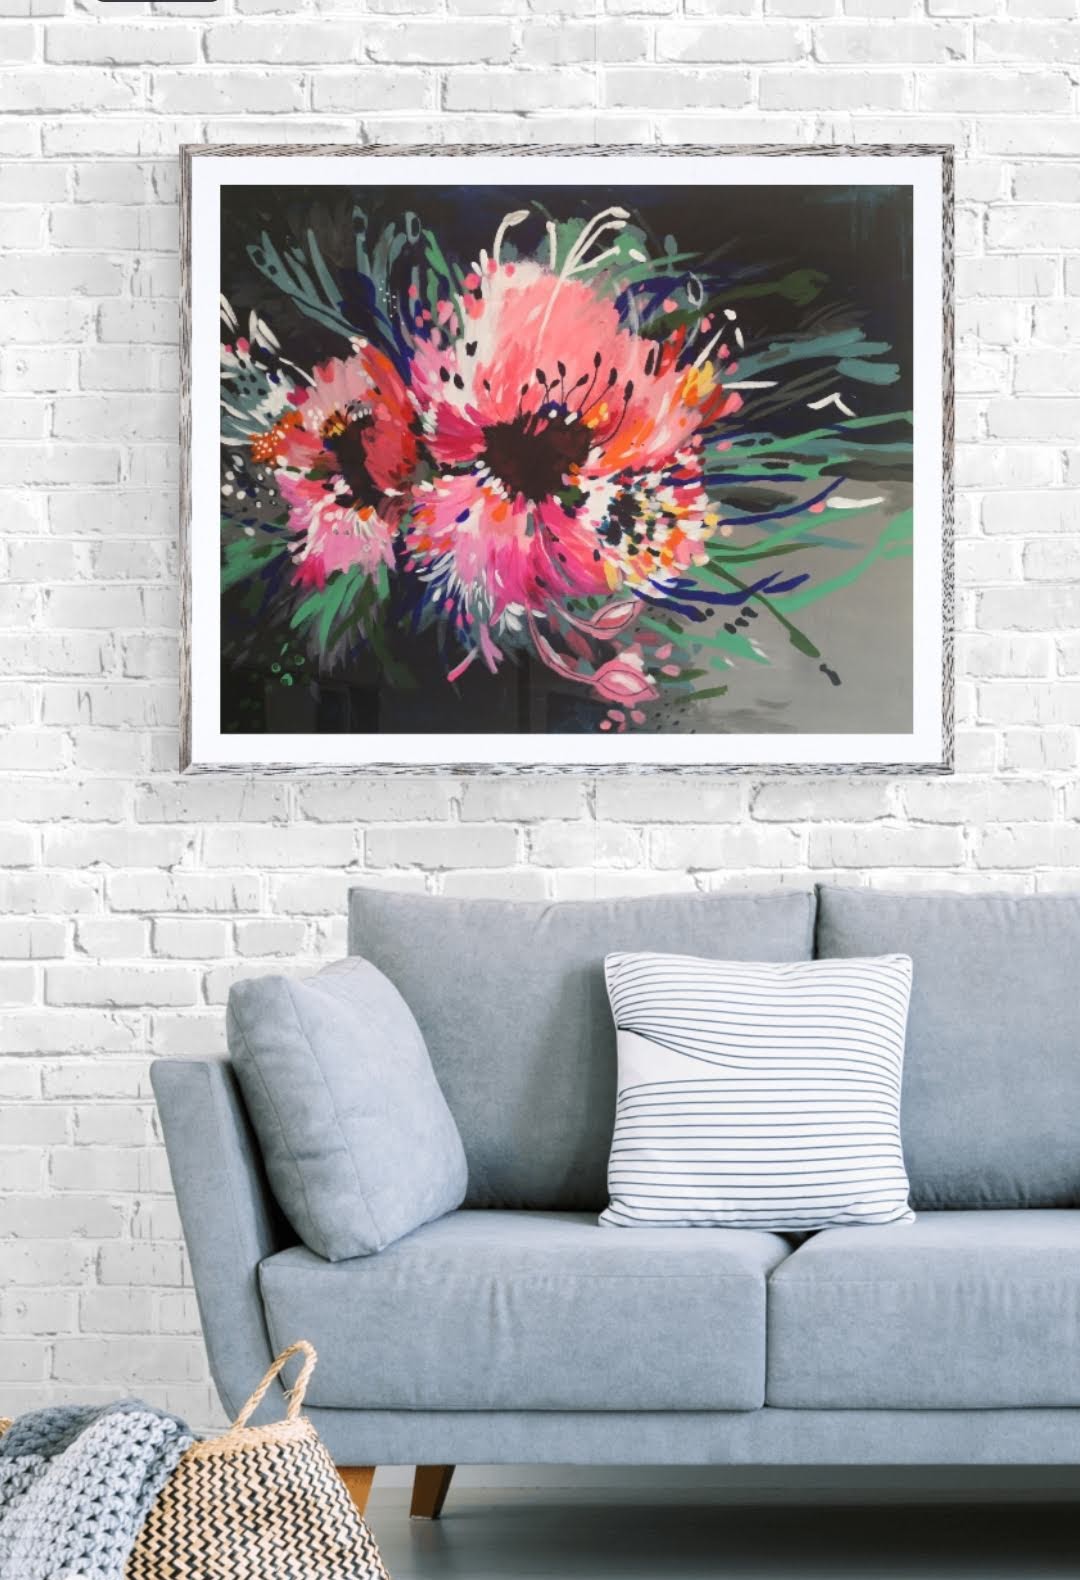 Art Print of Abstract Flower Painting on canvas, hanging on white brick wall above grey couch, by Judy Century.